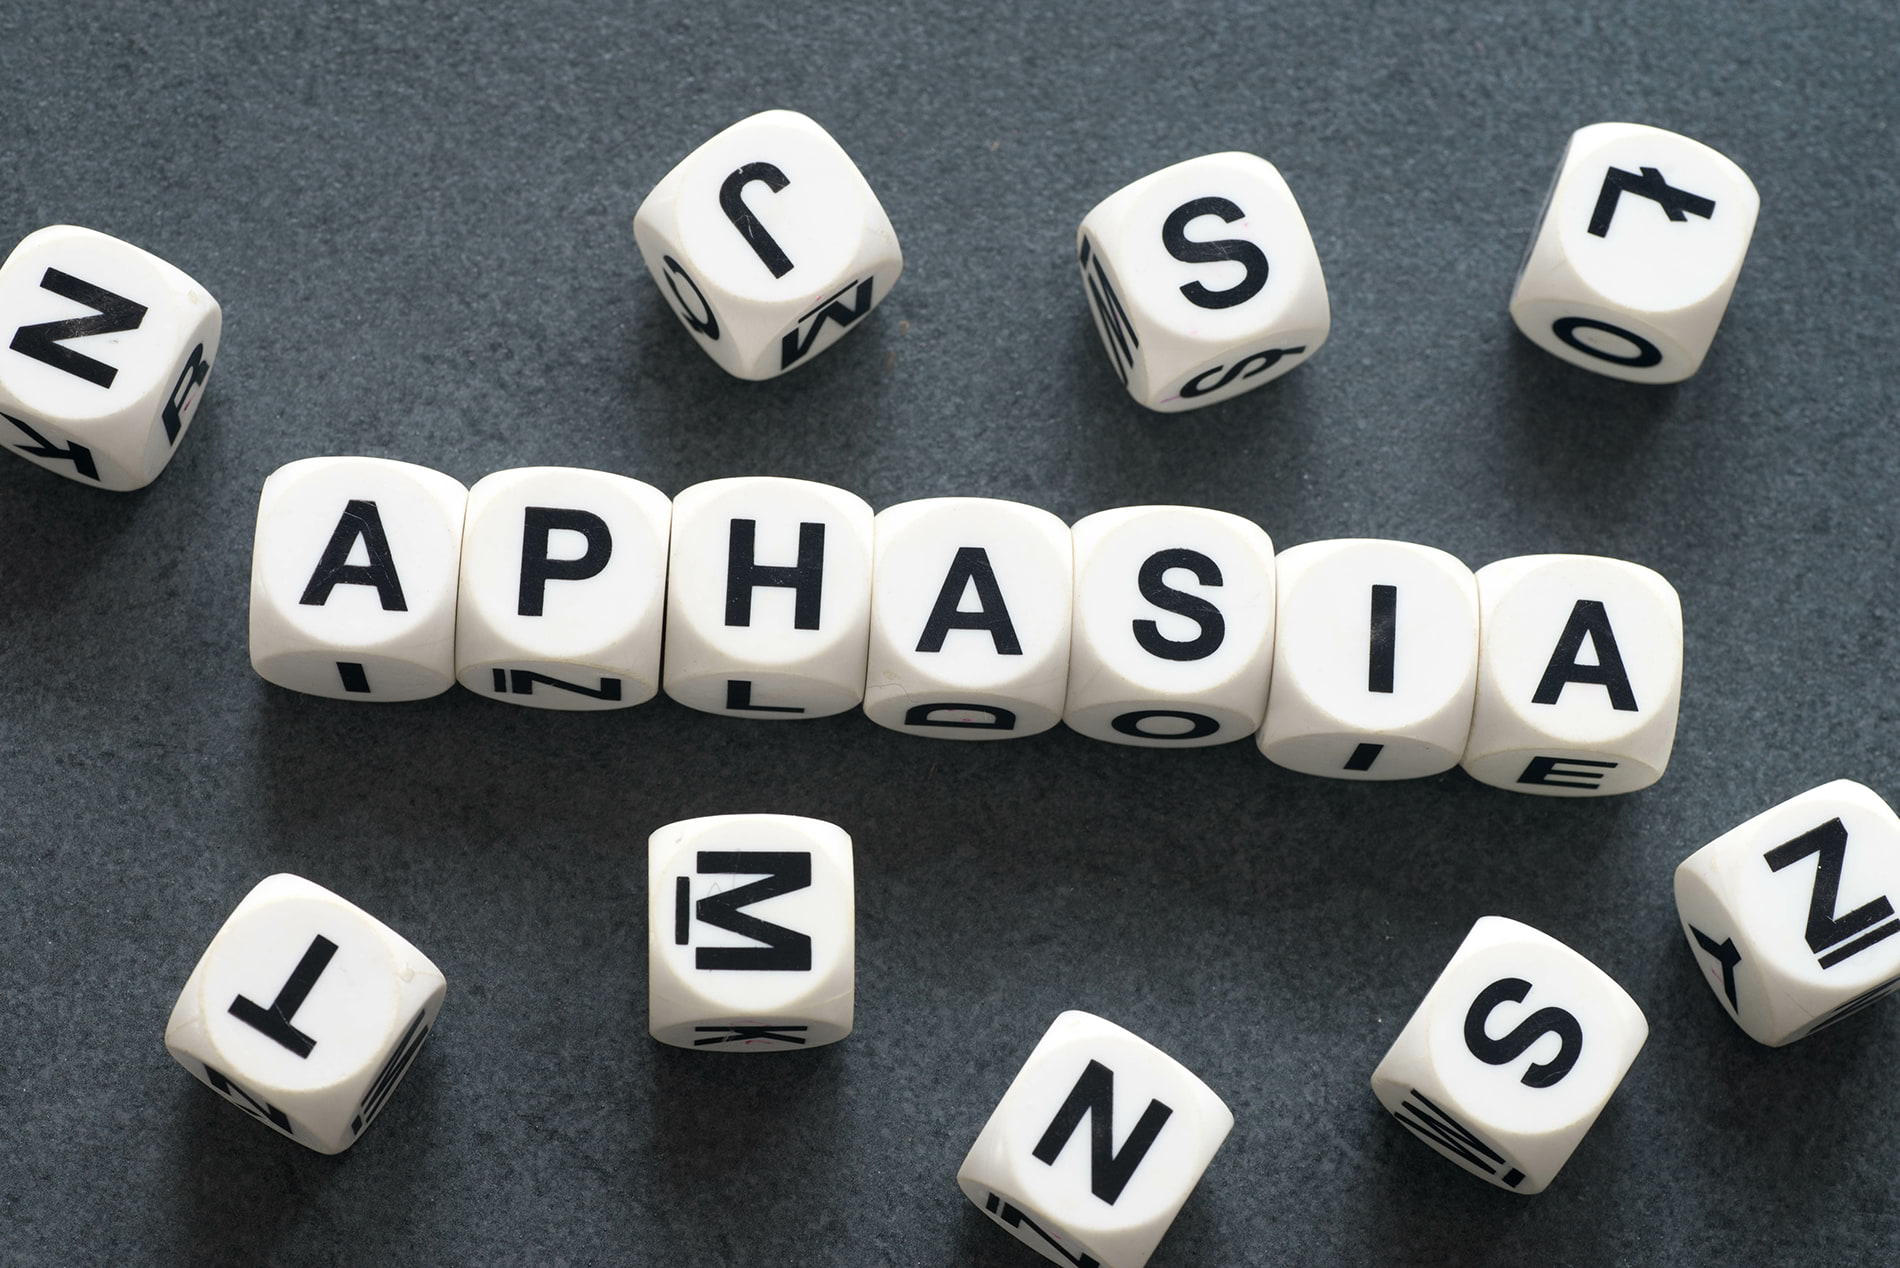 Aphasia spelled out in dice with jumbled letters around it.